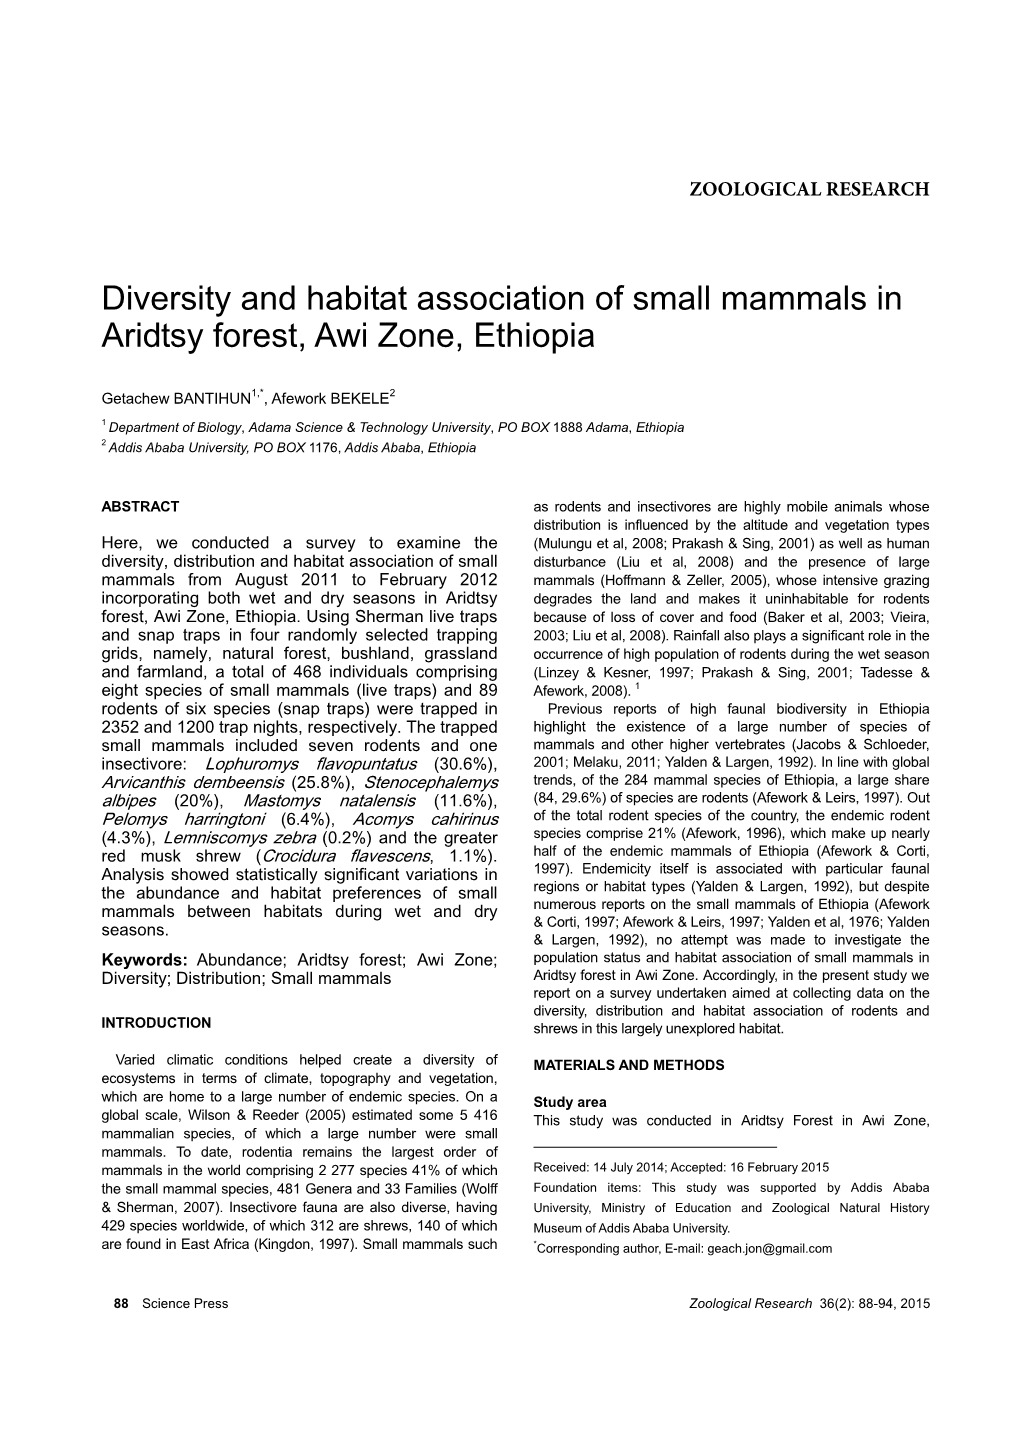 Diversity and Habitat Association of Small Mammals in Aridtsy Forest, Awi Zone, Ethiopia